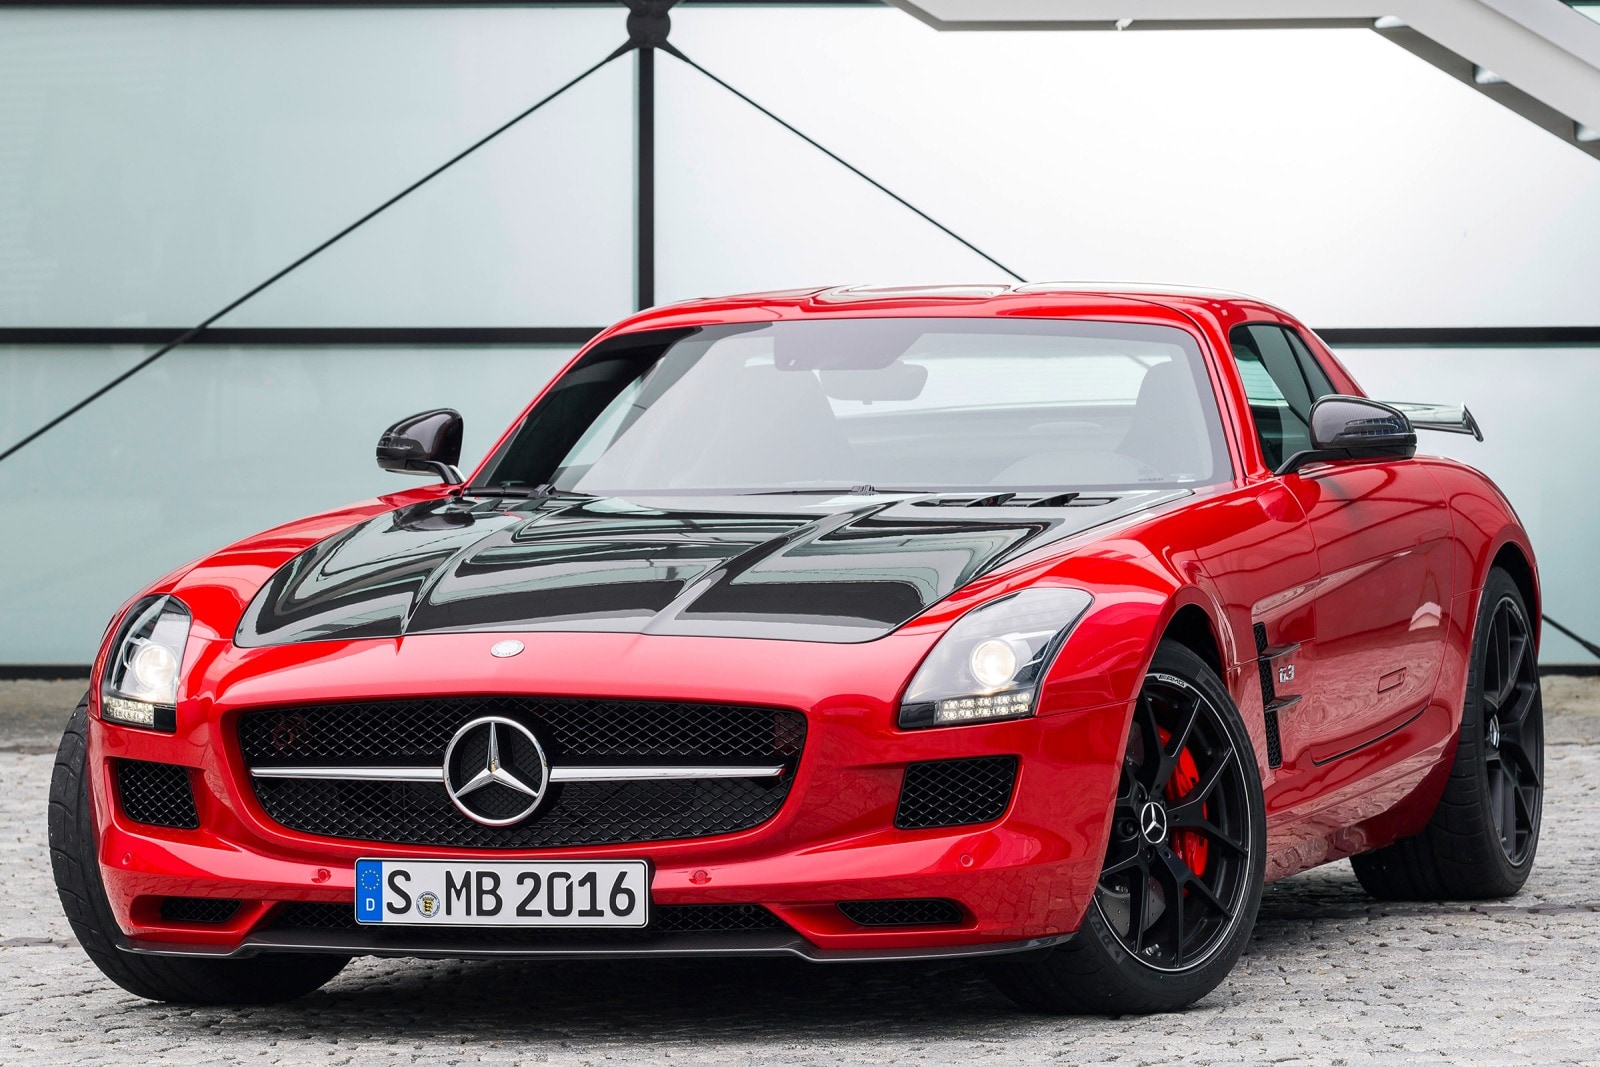 Used 2015 Mercedes-Benz SLS AMG GT Final Edition Coupe Review | Edmunds